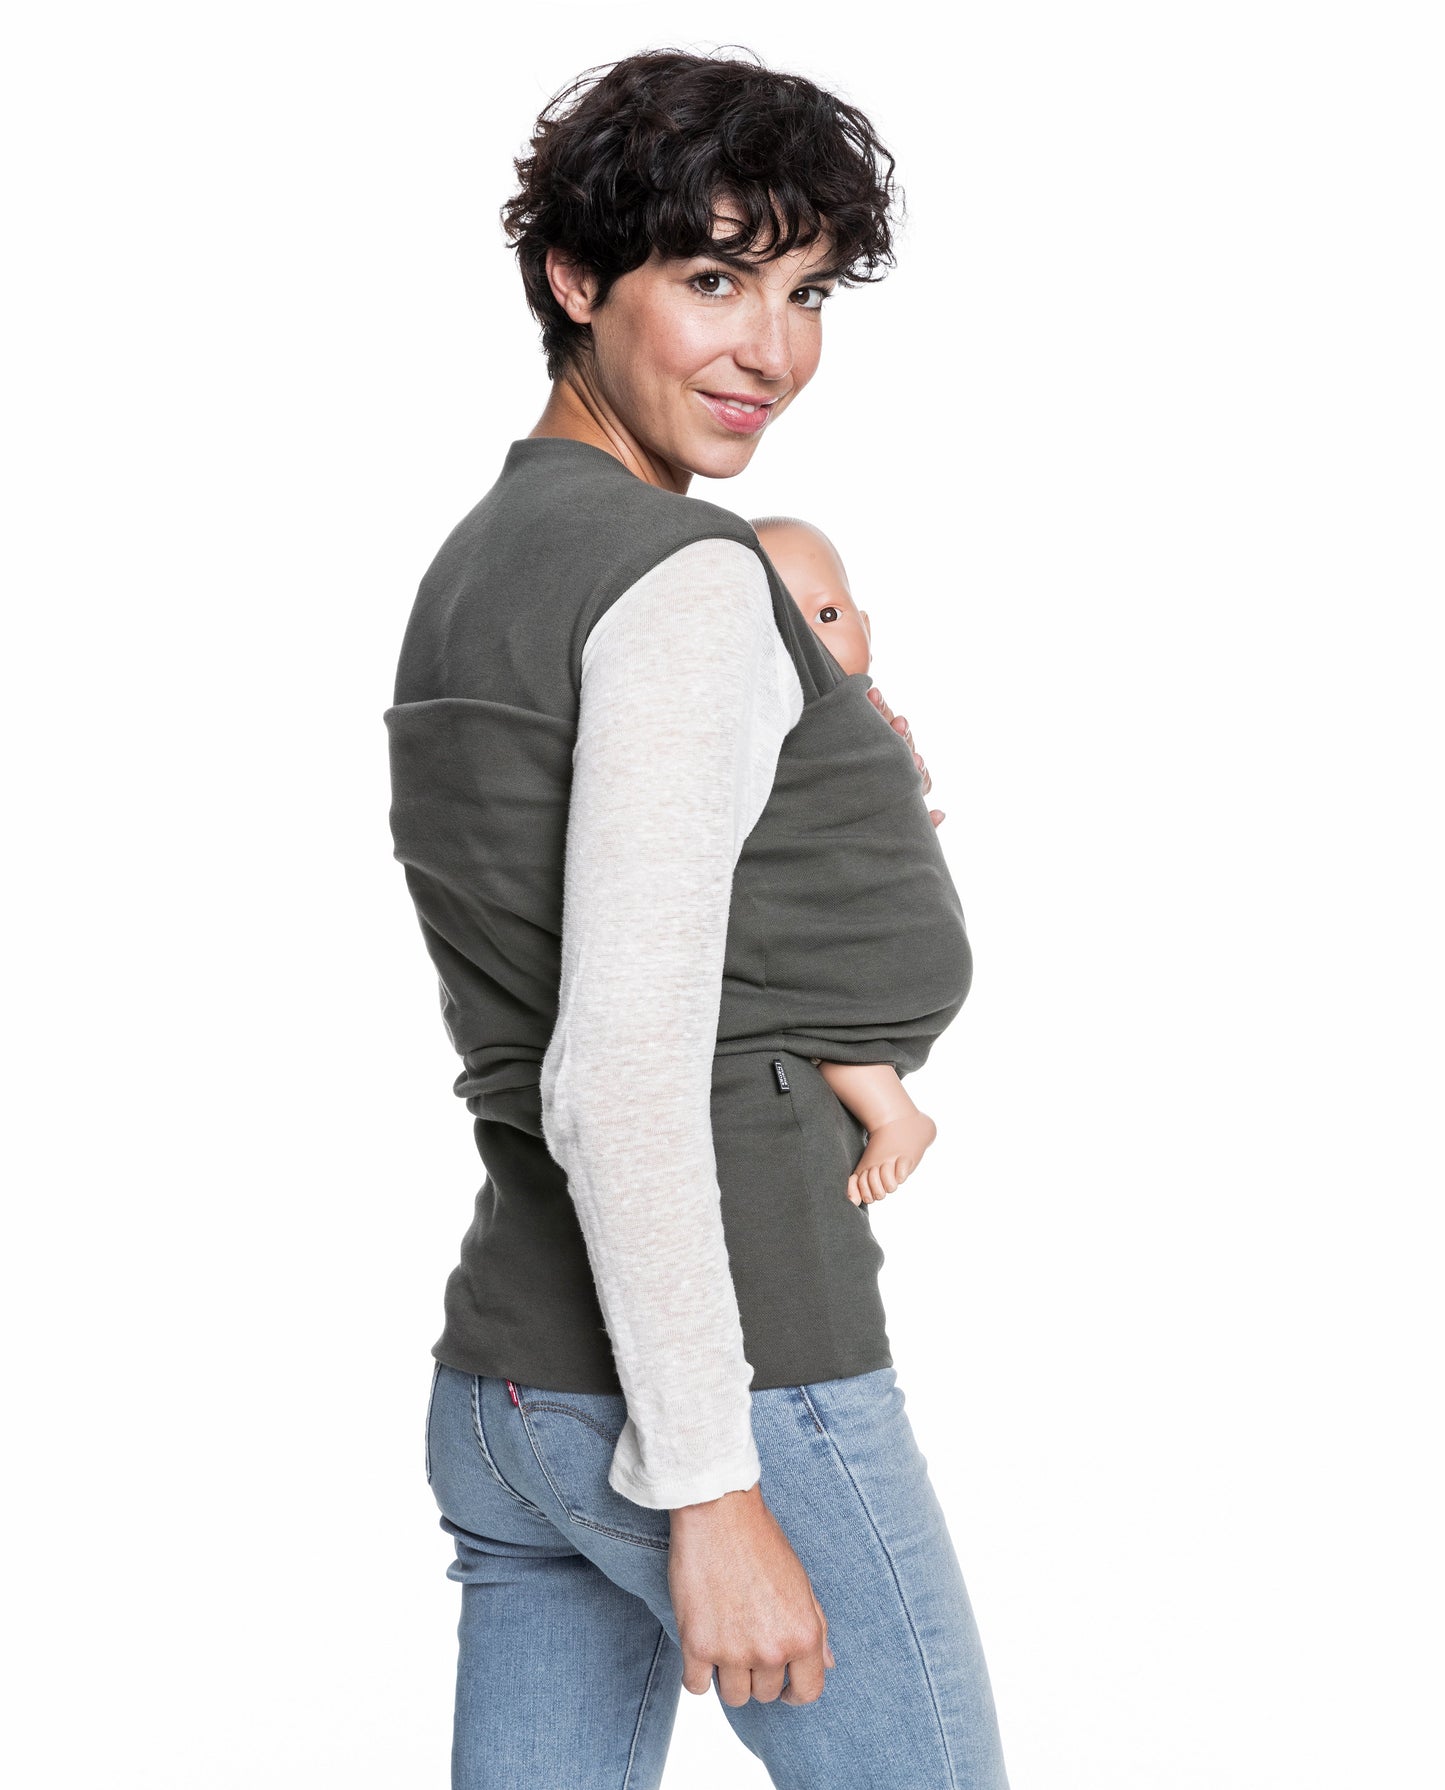 Carry & Pack baby carrier olive green Carriers Mama Hangs 